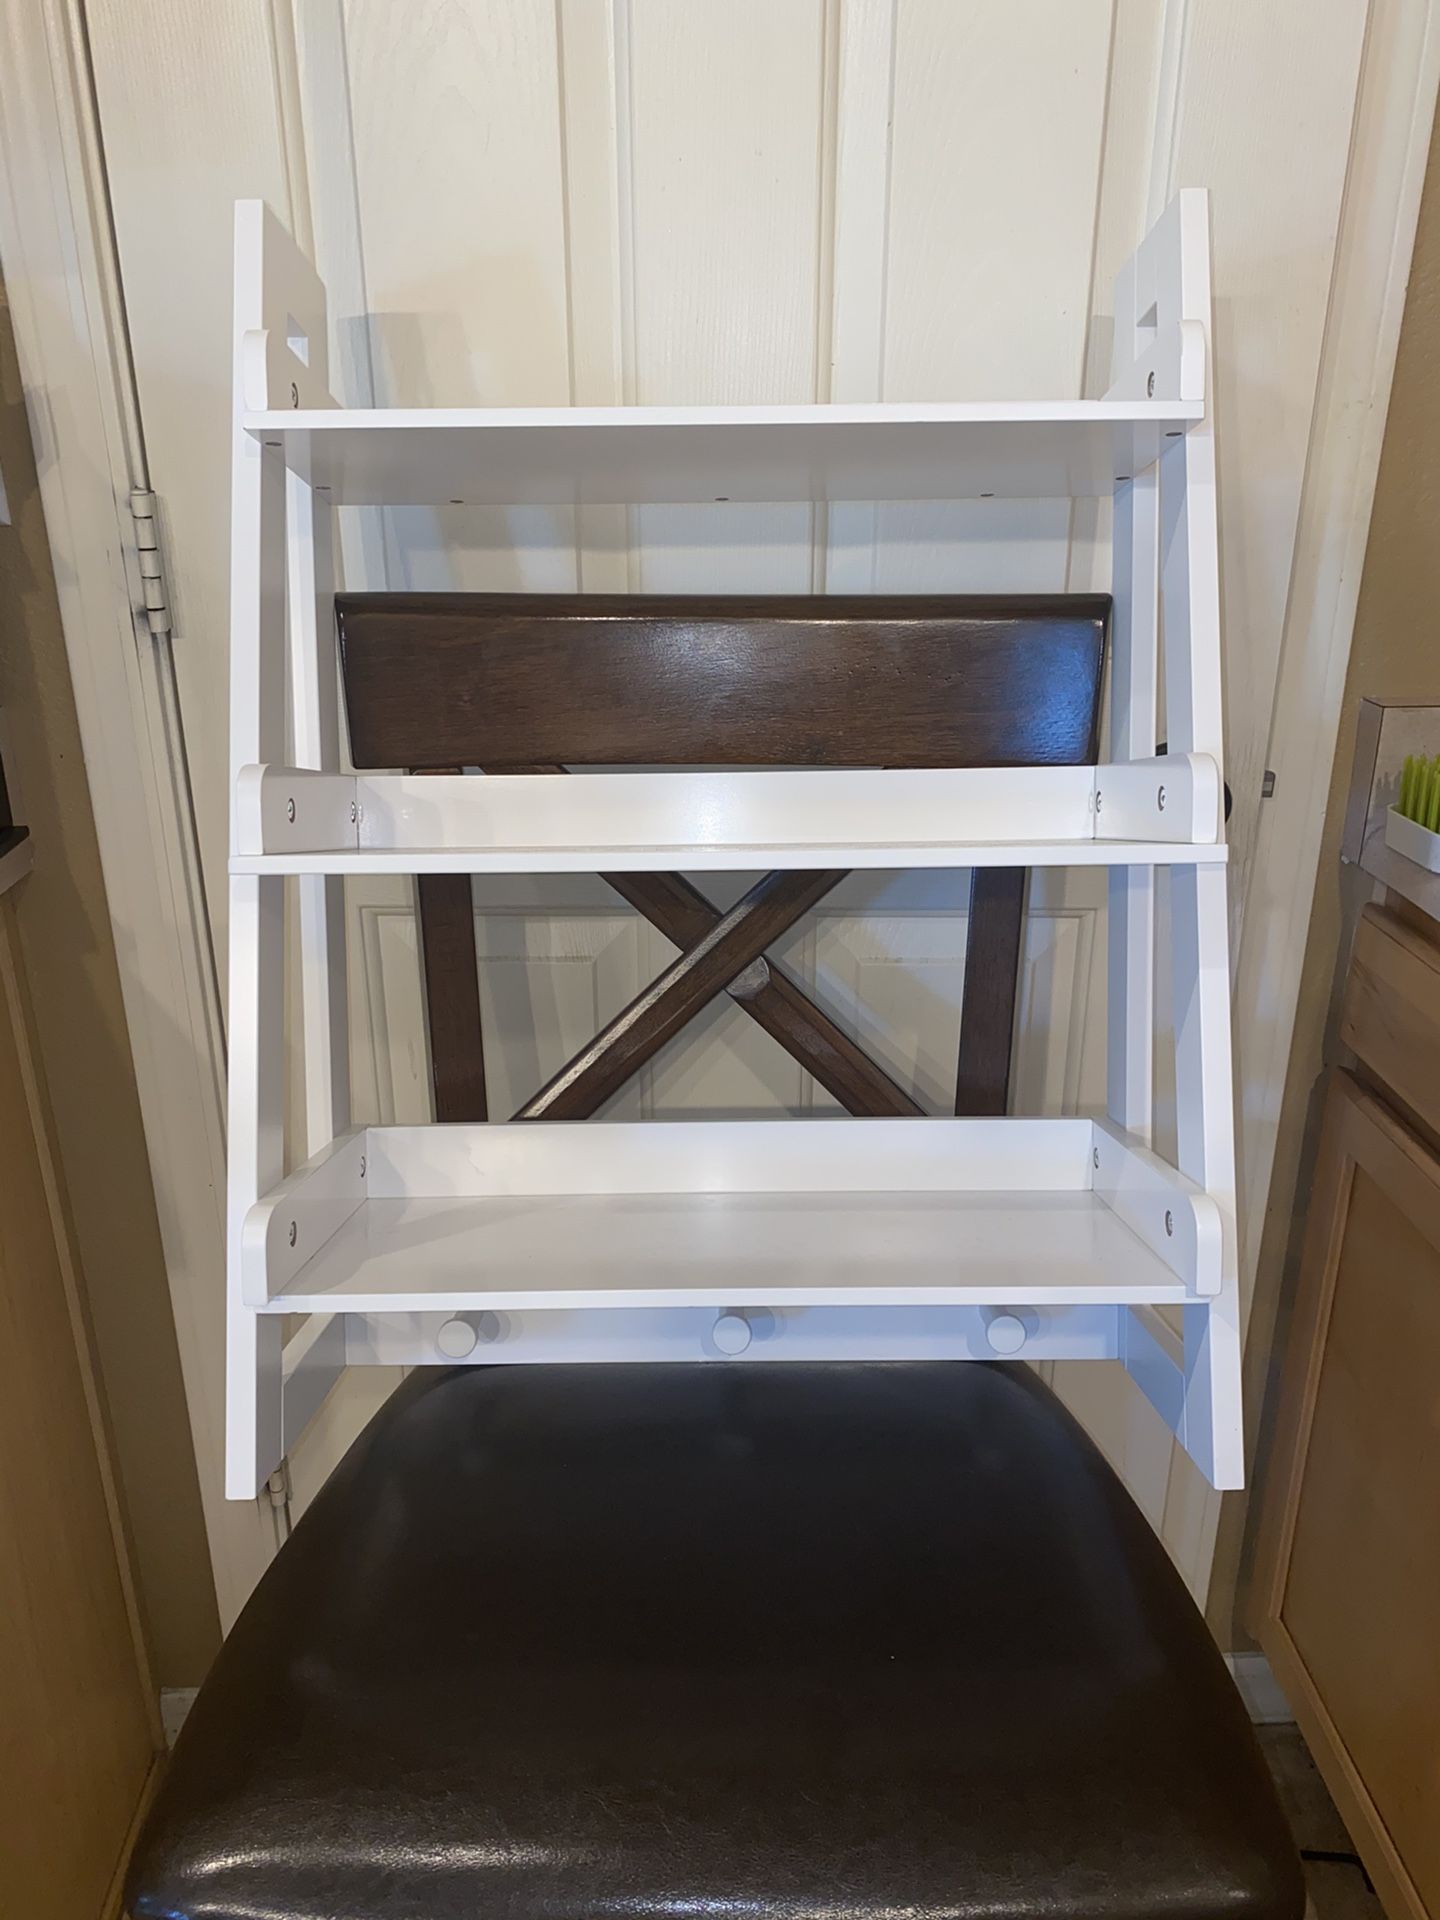 Hanging ladder shelf with knobs for hanging